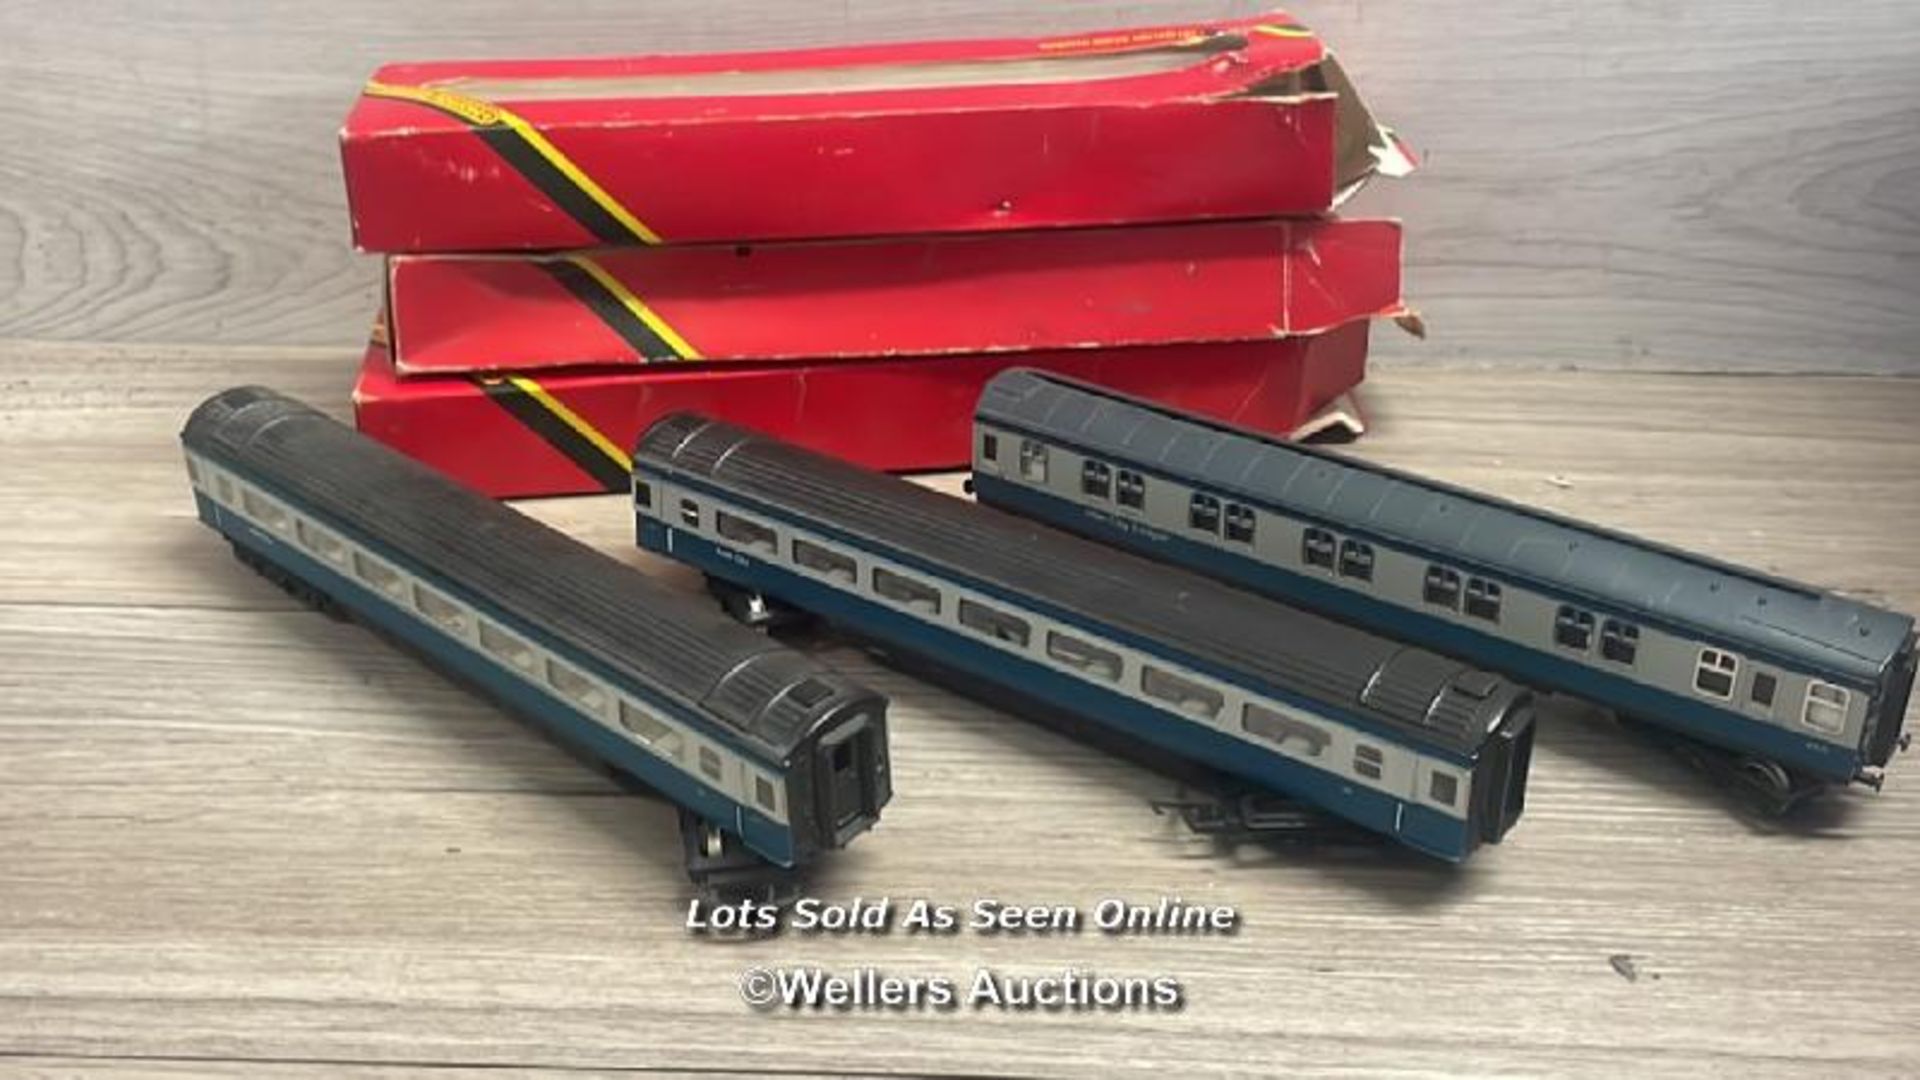 THREE HORNBY 00 GAUGE SCALE MODEL TRAIN COACHES